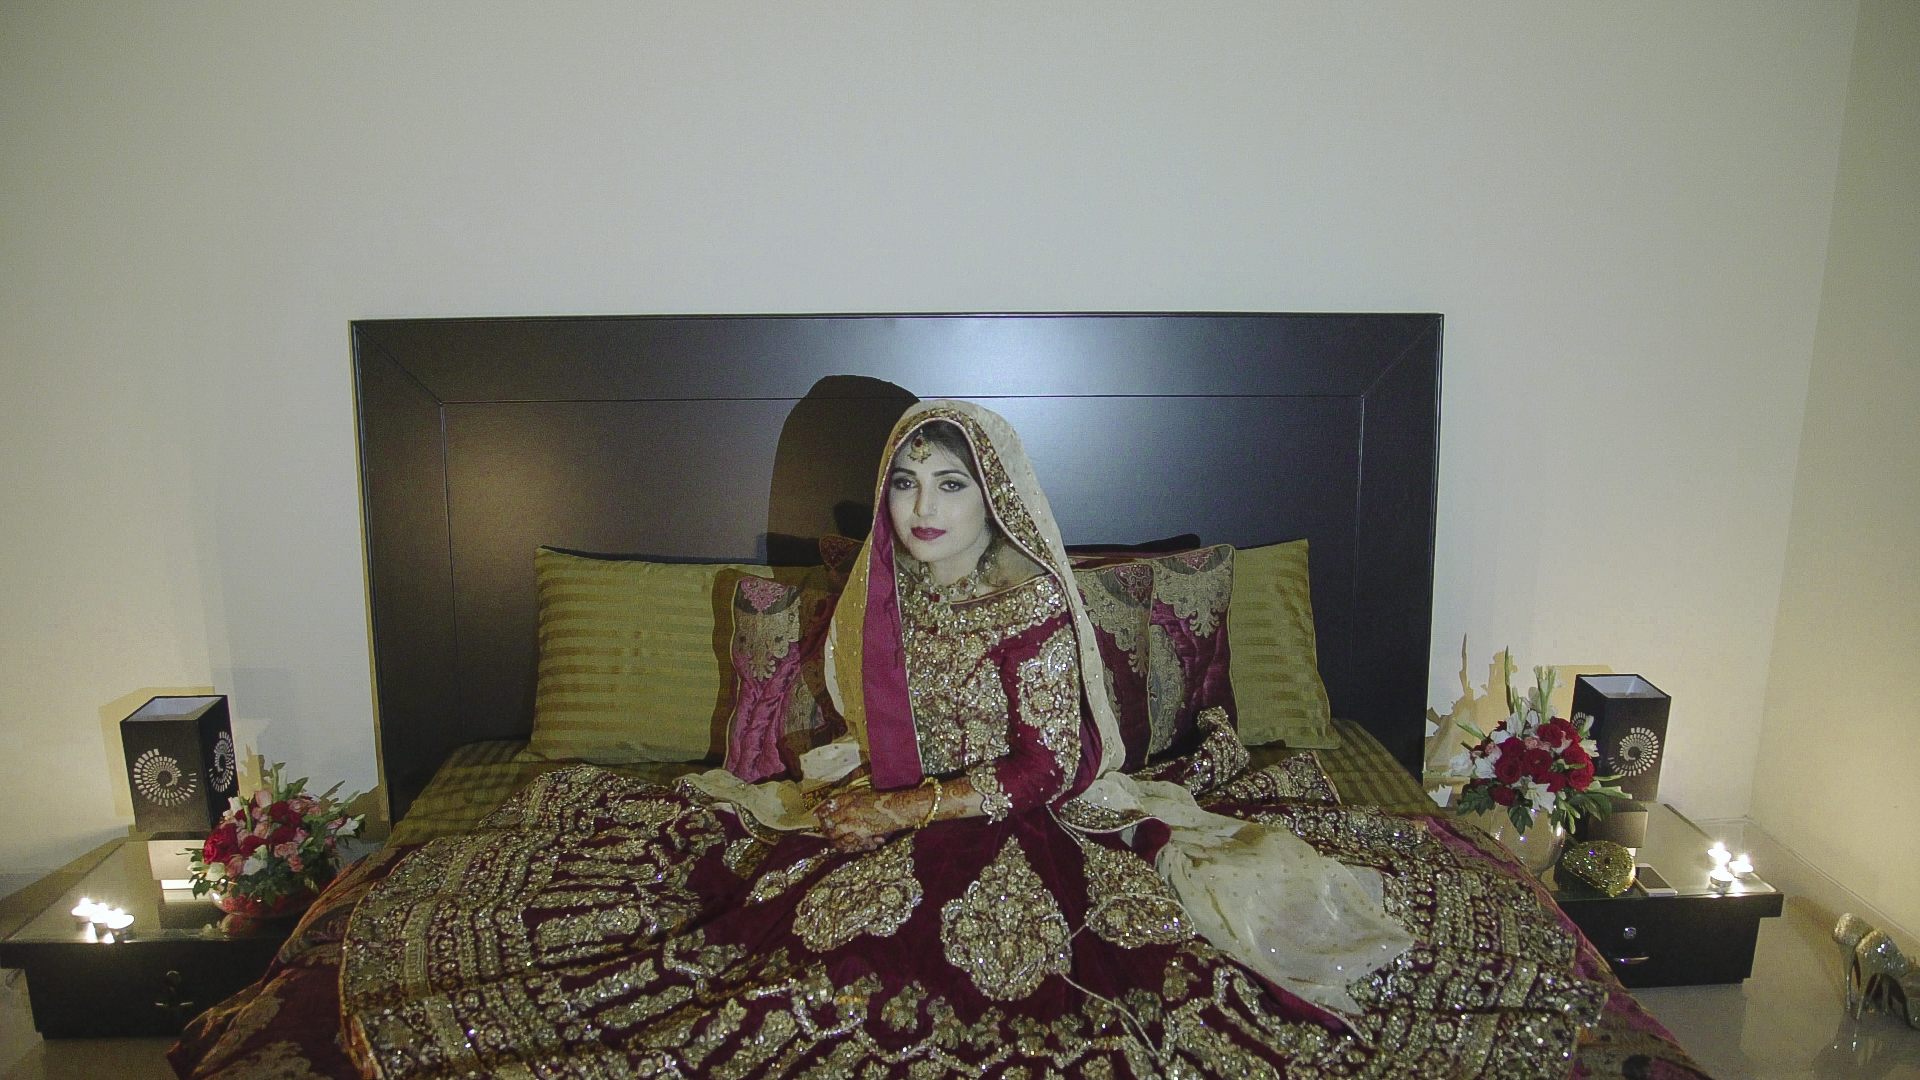  Ayesha Sadal waits for her husband in the candlelight of their bedroom on the night of their  baraat . This significant ritual is called  suhag raat , which refers to the first night and consummation of the marriage. Traditionally, the female member